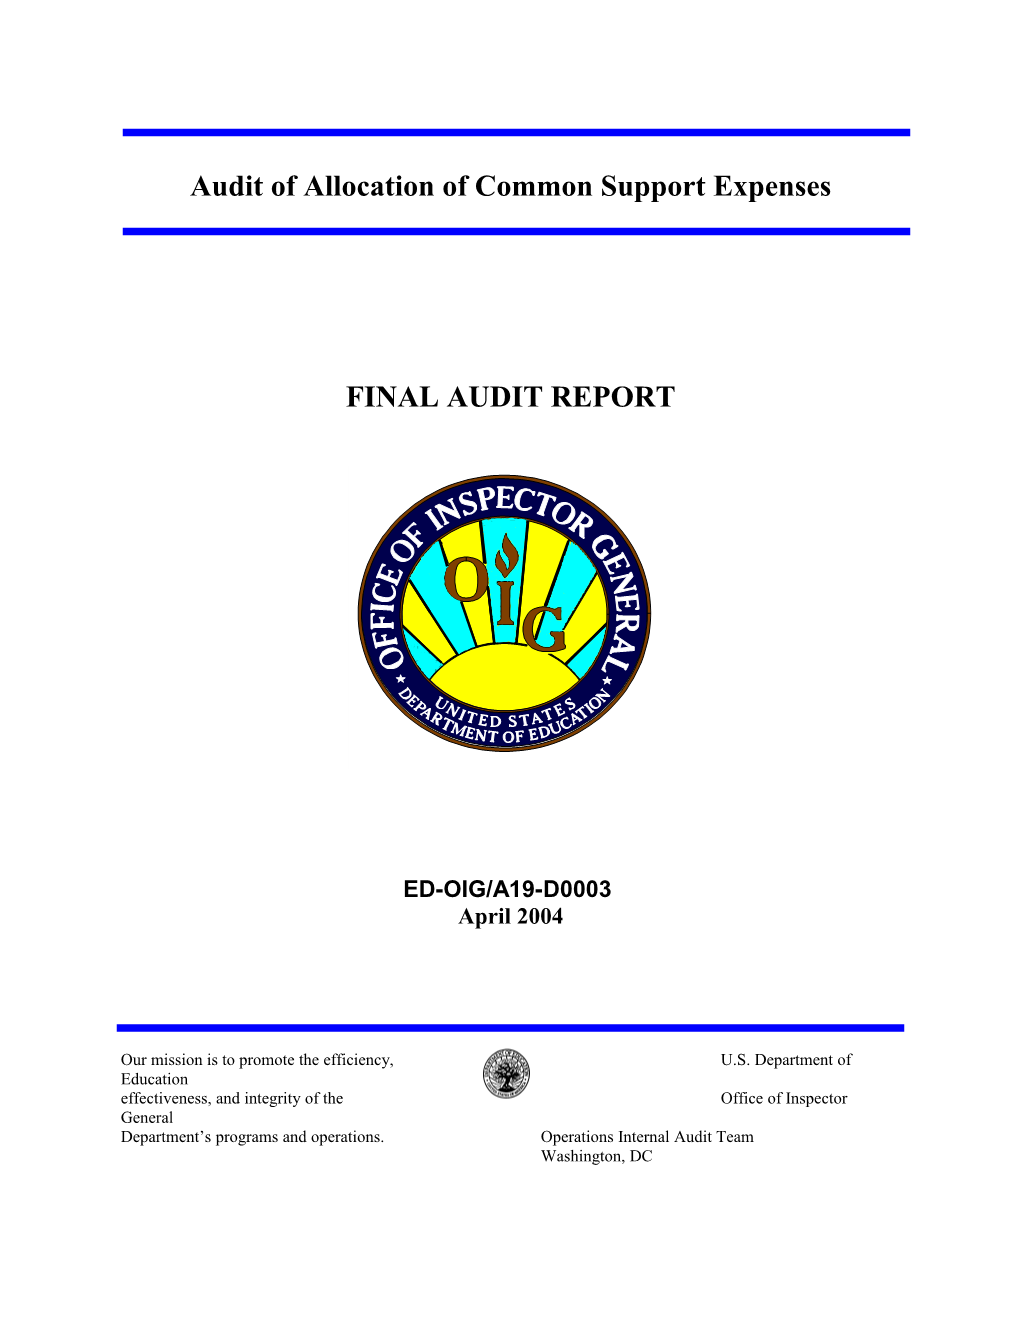 A19D0003 - Audit of Allocation of Common Support Expenses (MS Word)